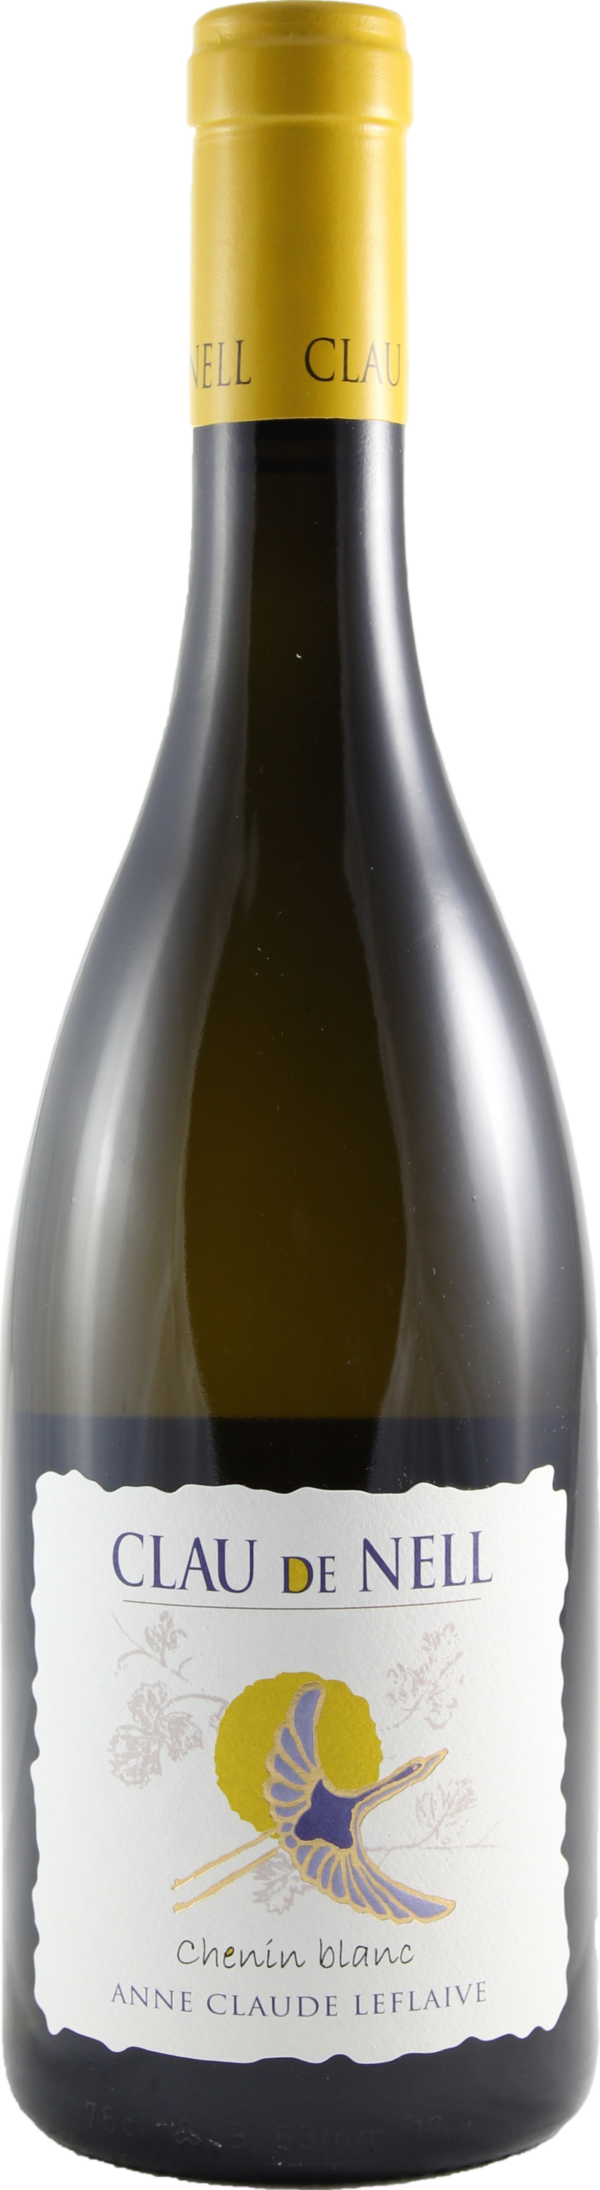 Product image of Clau de Nell Chenin Blanc 2021 from 8wines